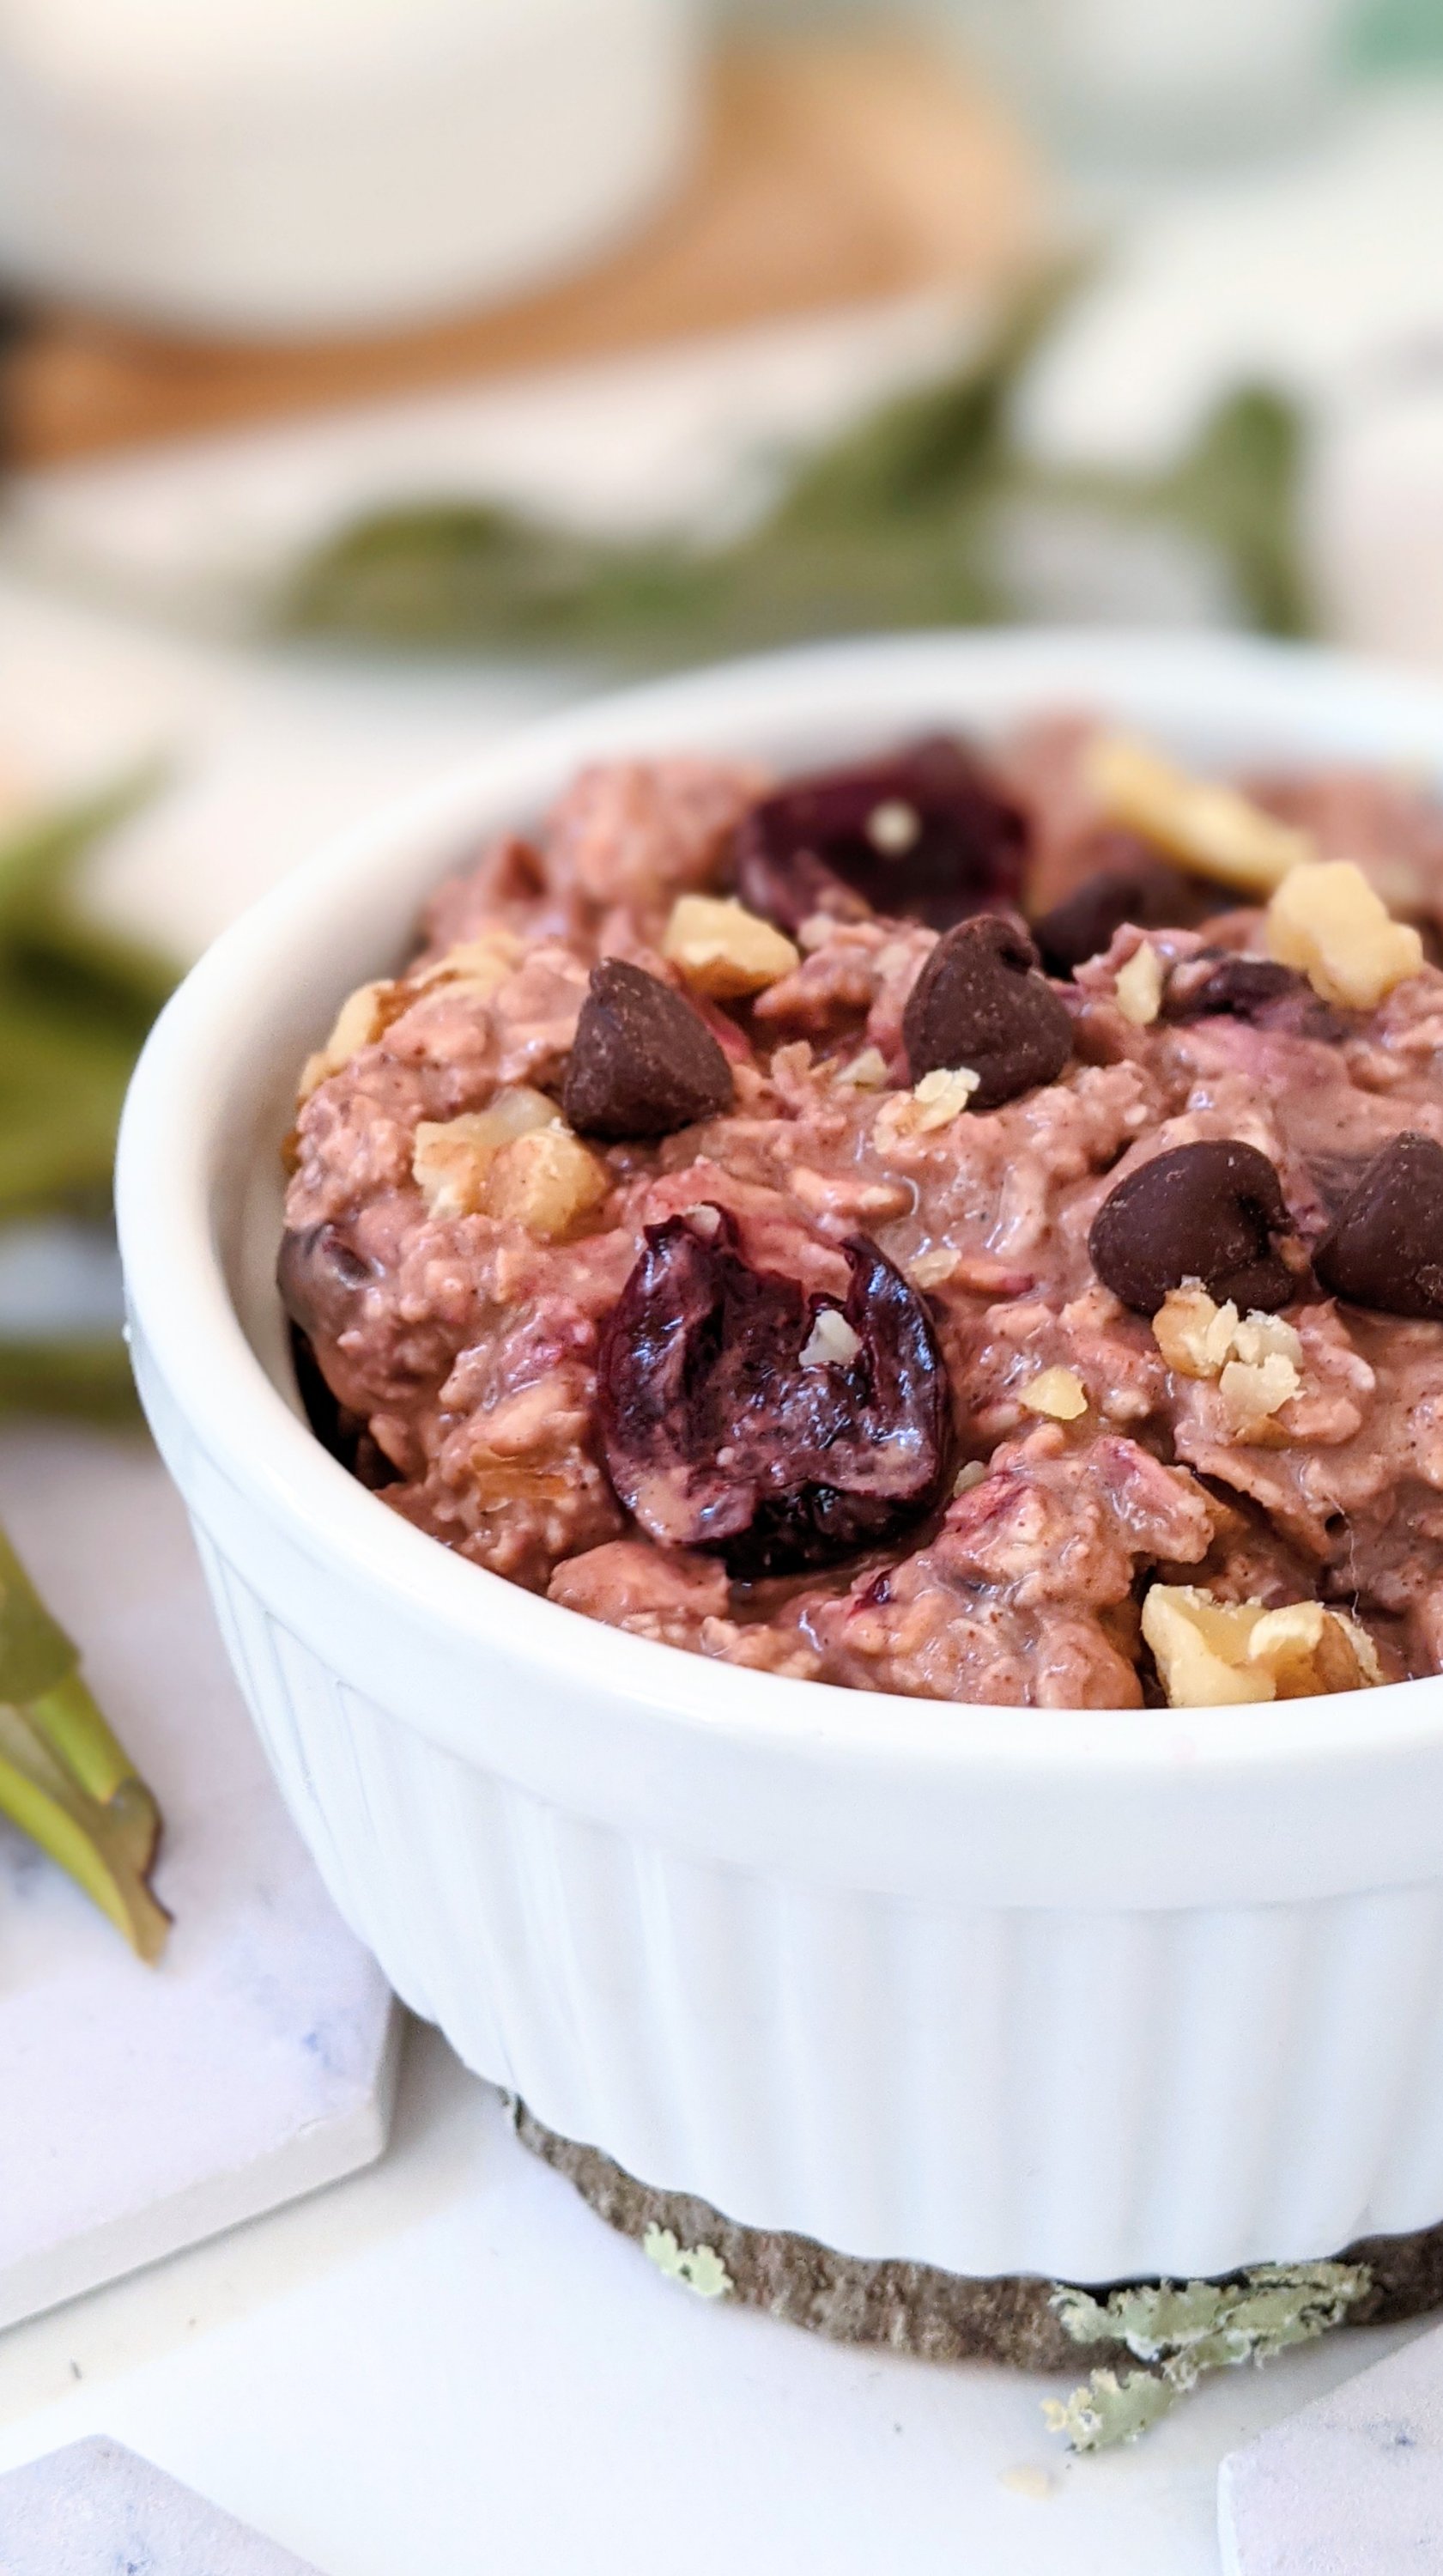 dark chocolate cherry overnight oats recipe vegan dairy free oatmeal recipe gluten free breakfasts with chocolate and cherries plant based cacao recipes for brunch or breakfast healthy